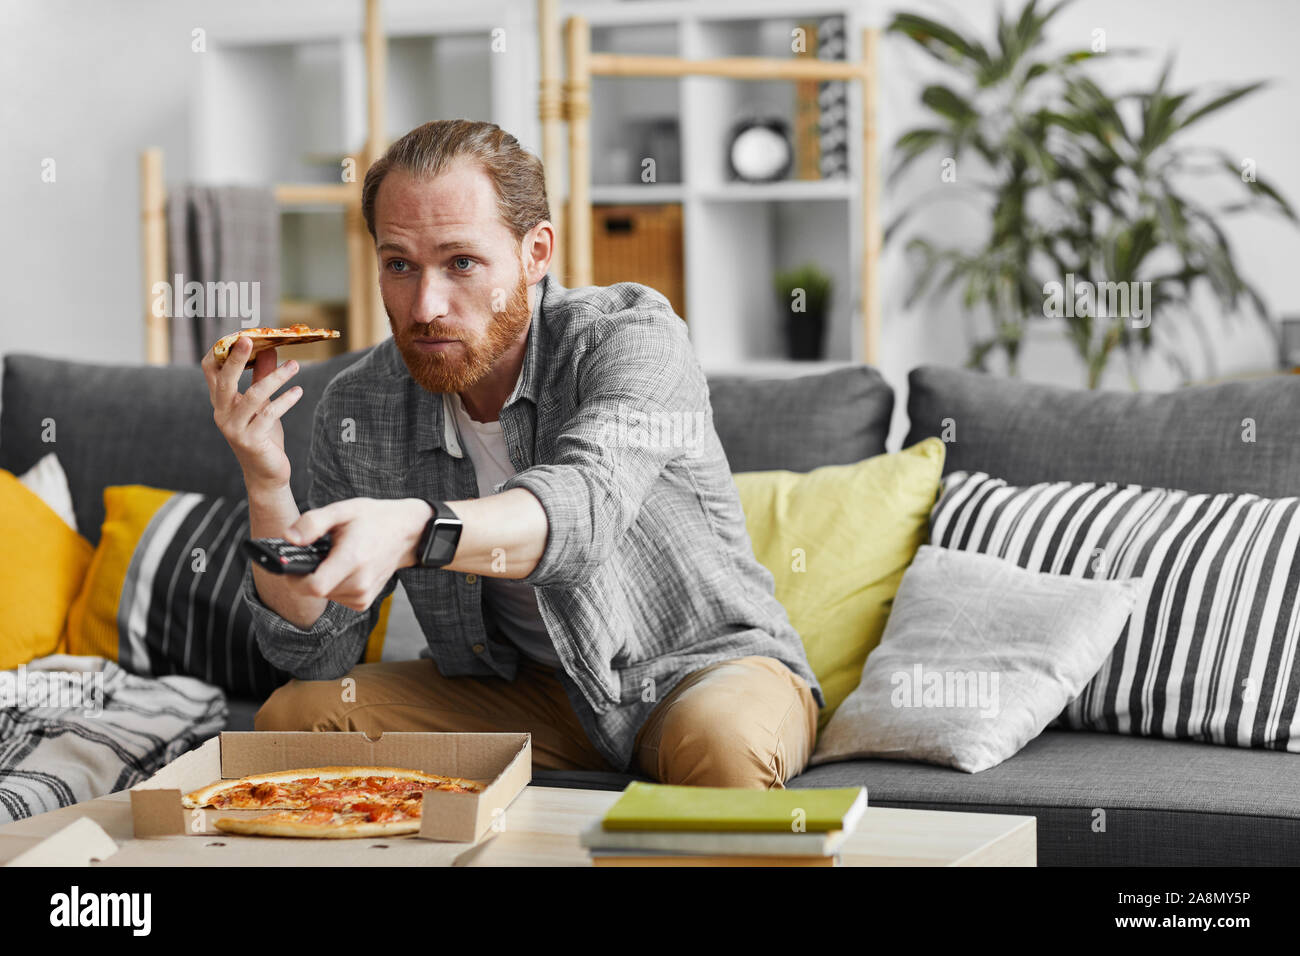 Portrait of middle-aged man watching TV at home and eating pizza during lazy weekend, copy space Stock Photo